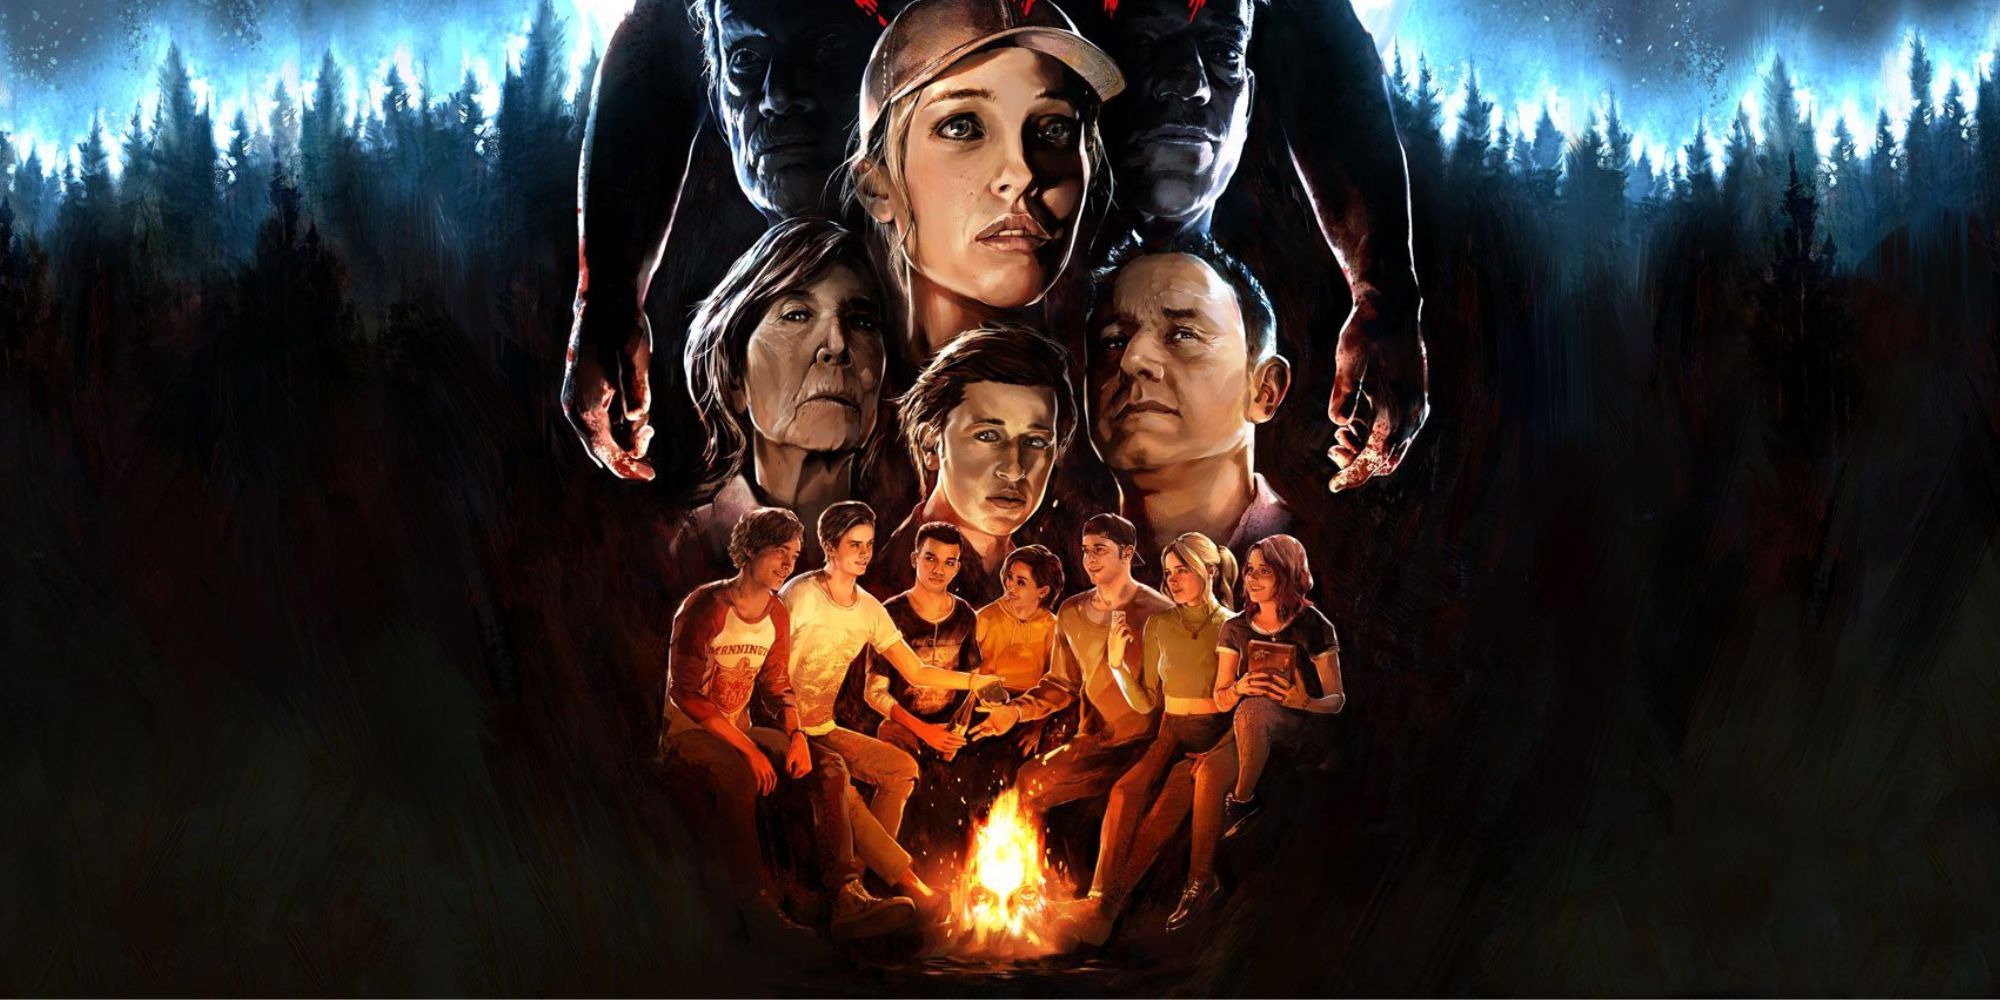 The Quarry title screen showing camp counsellors and Hacketts against a forest background